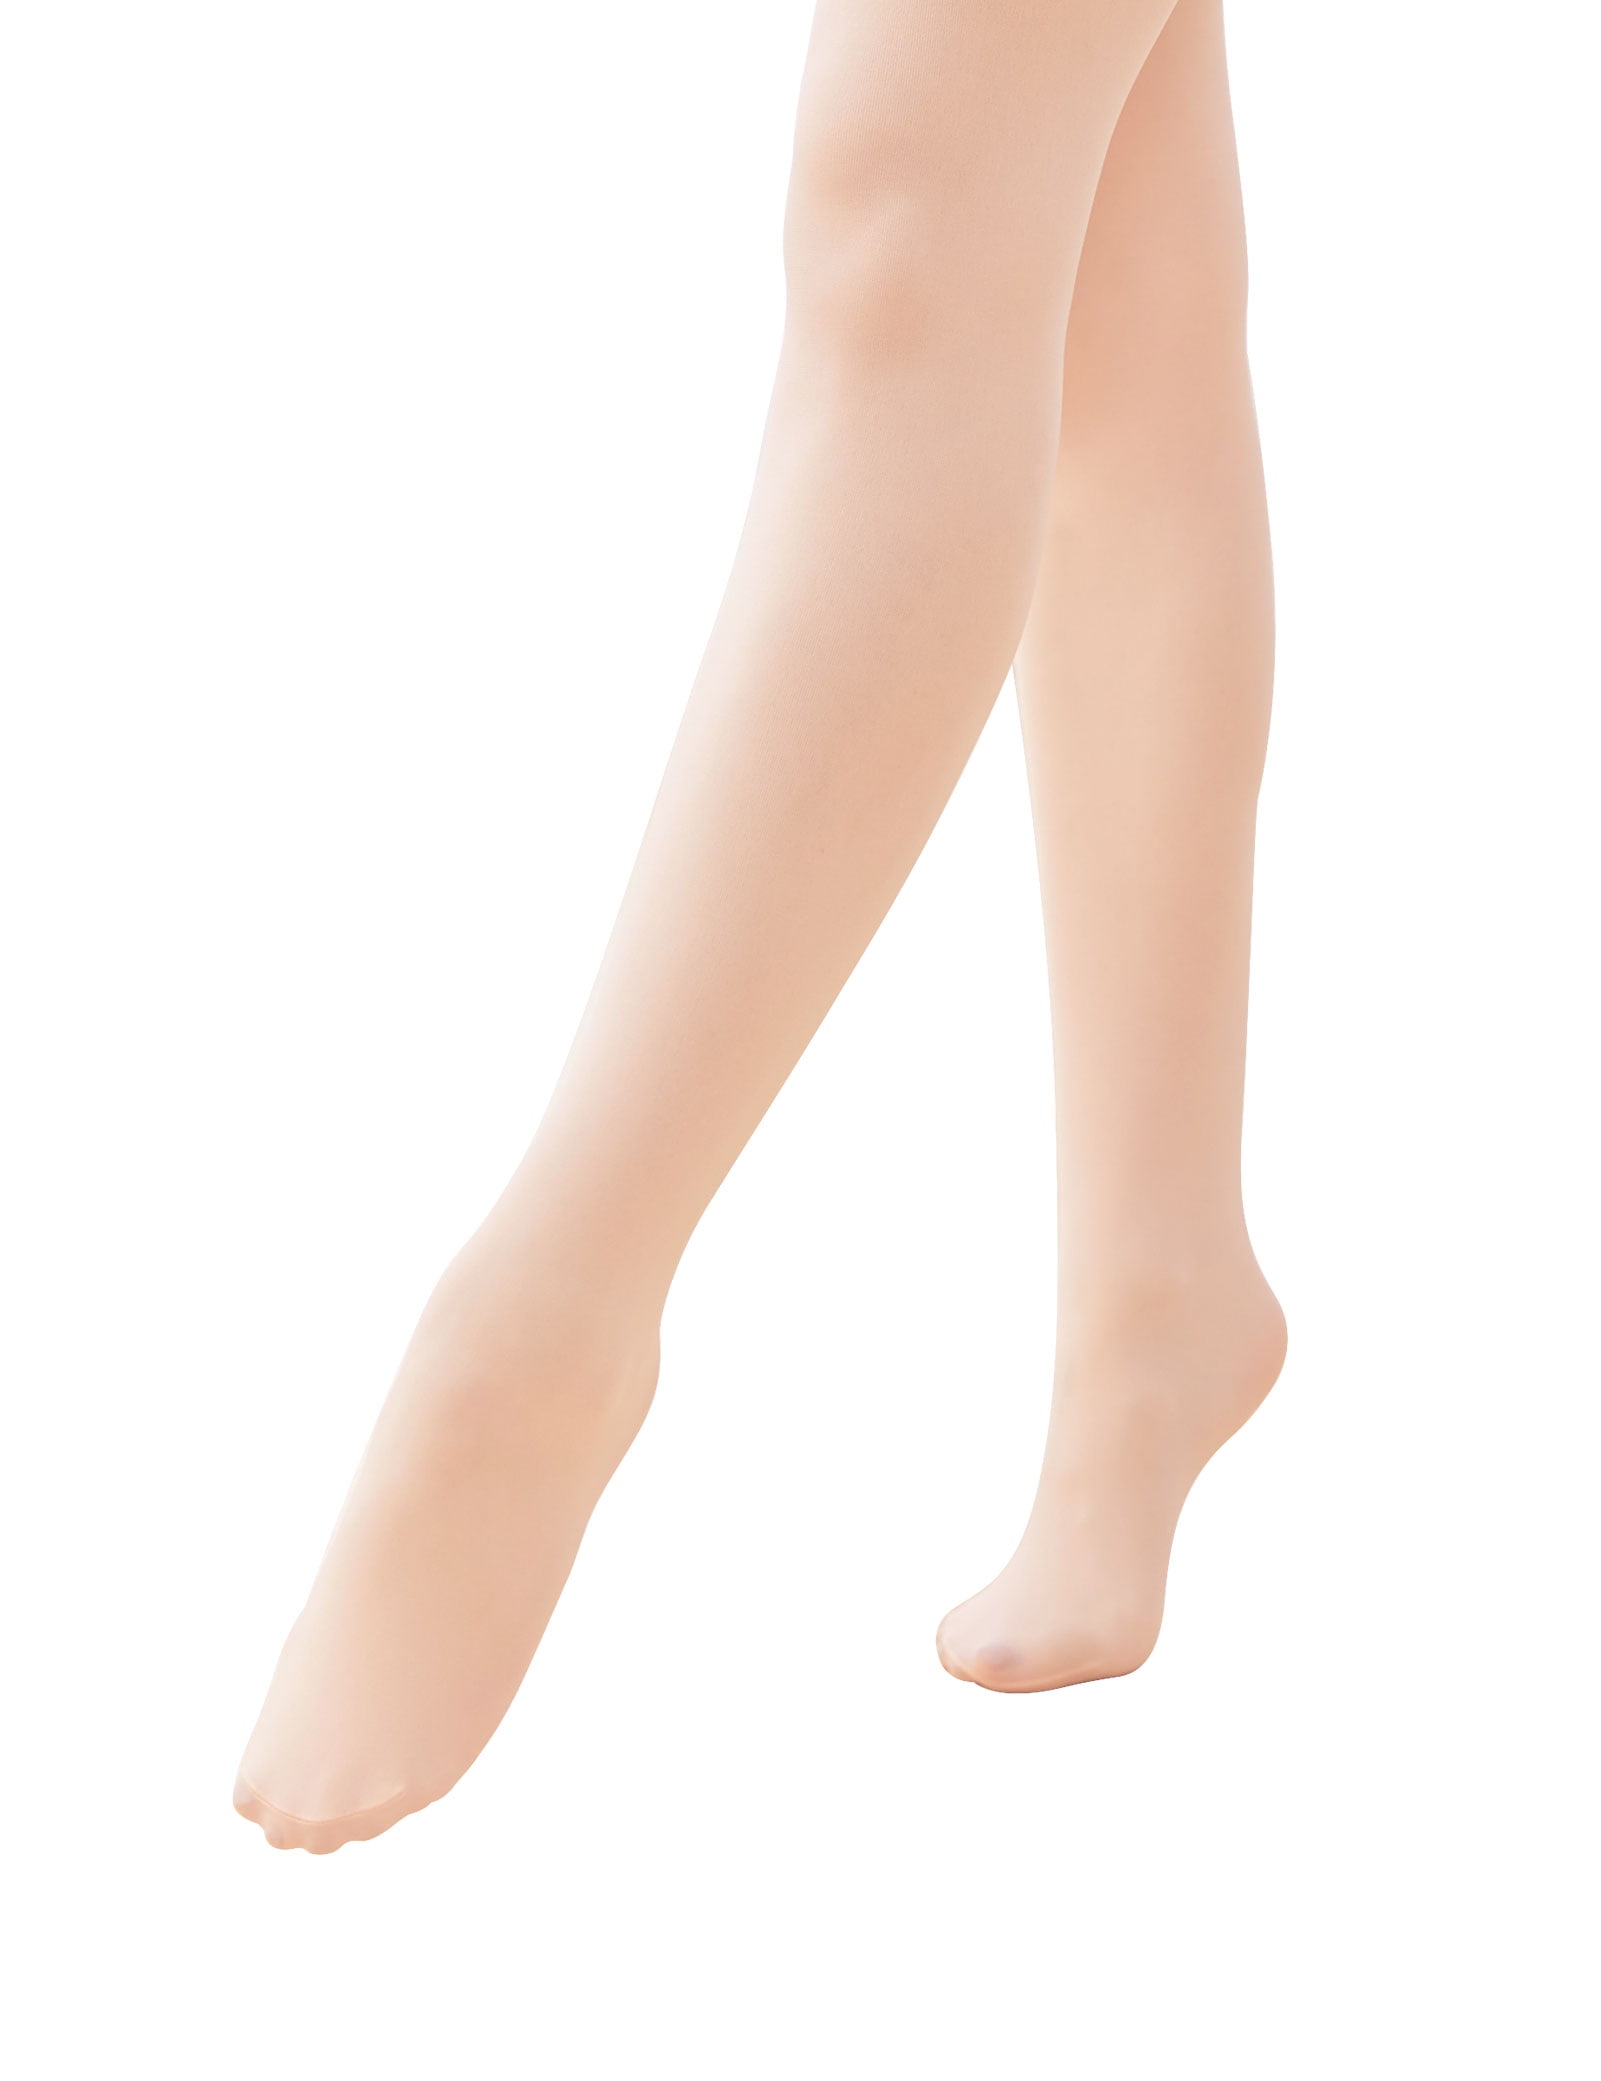 Daydance Girl's Women's Footless Tights for Dance, Balle, Gymnasics